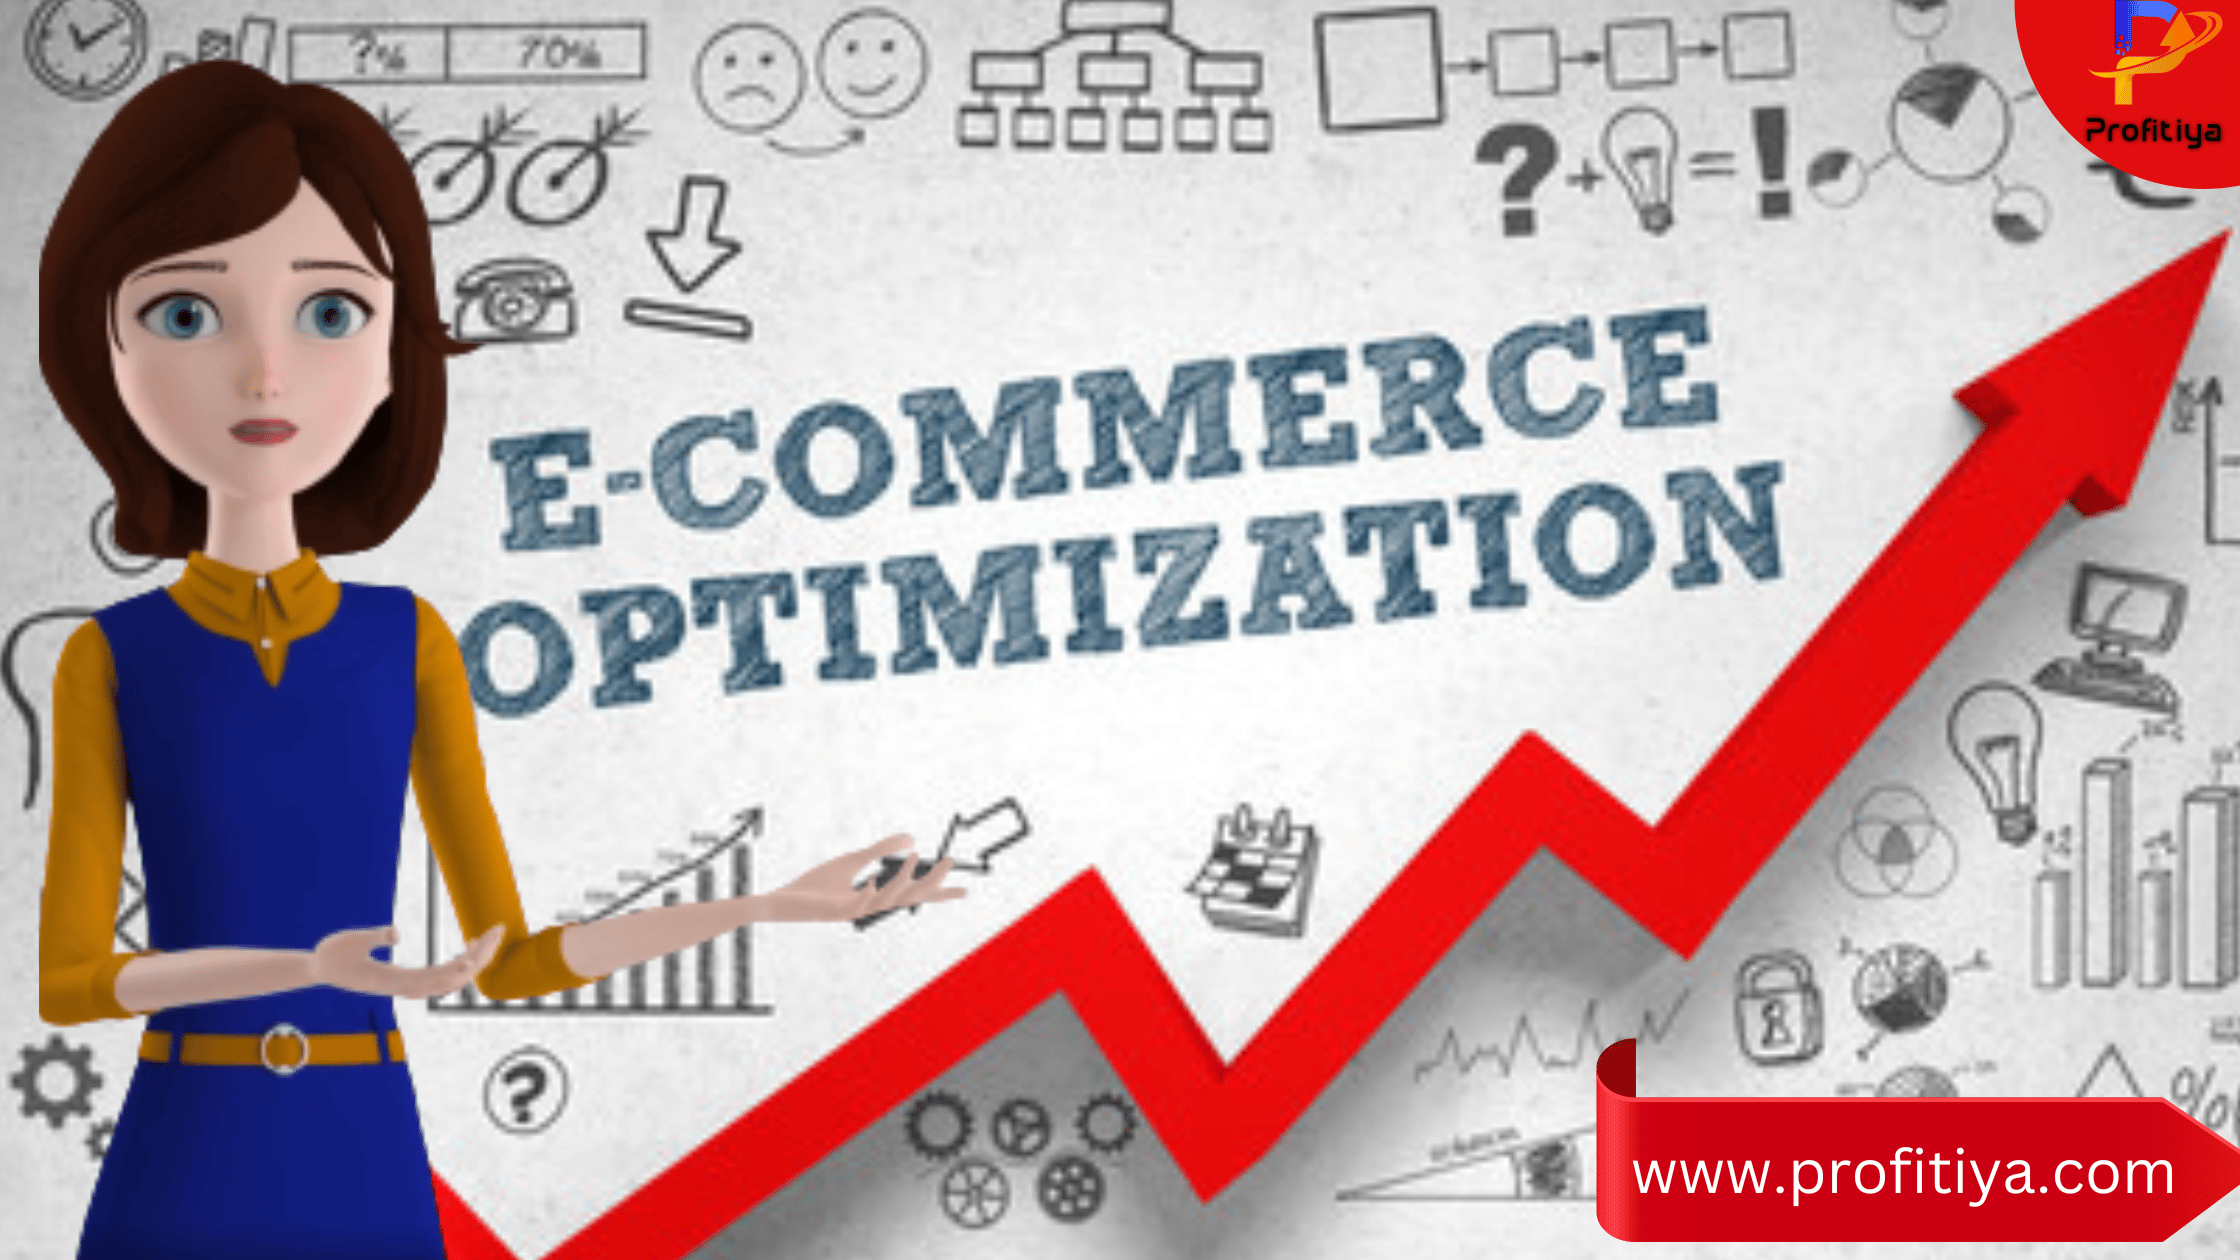 Ecommerce Optimization: Why You Need It & How To Do It?